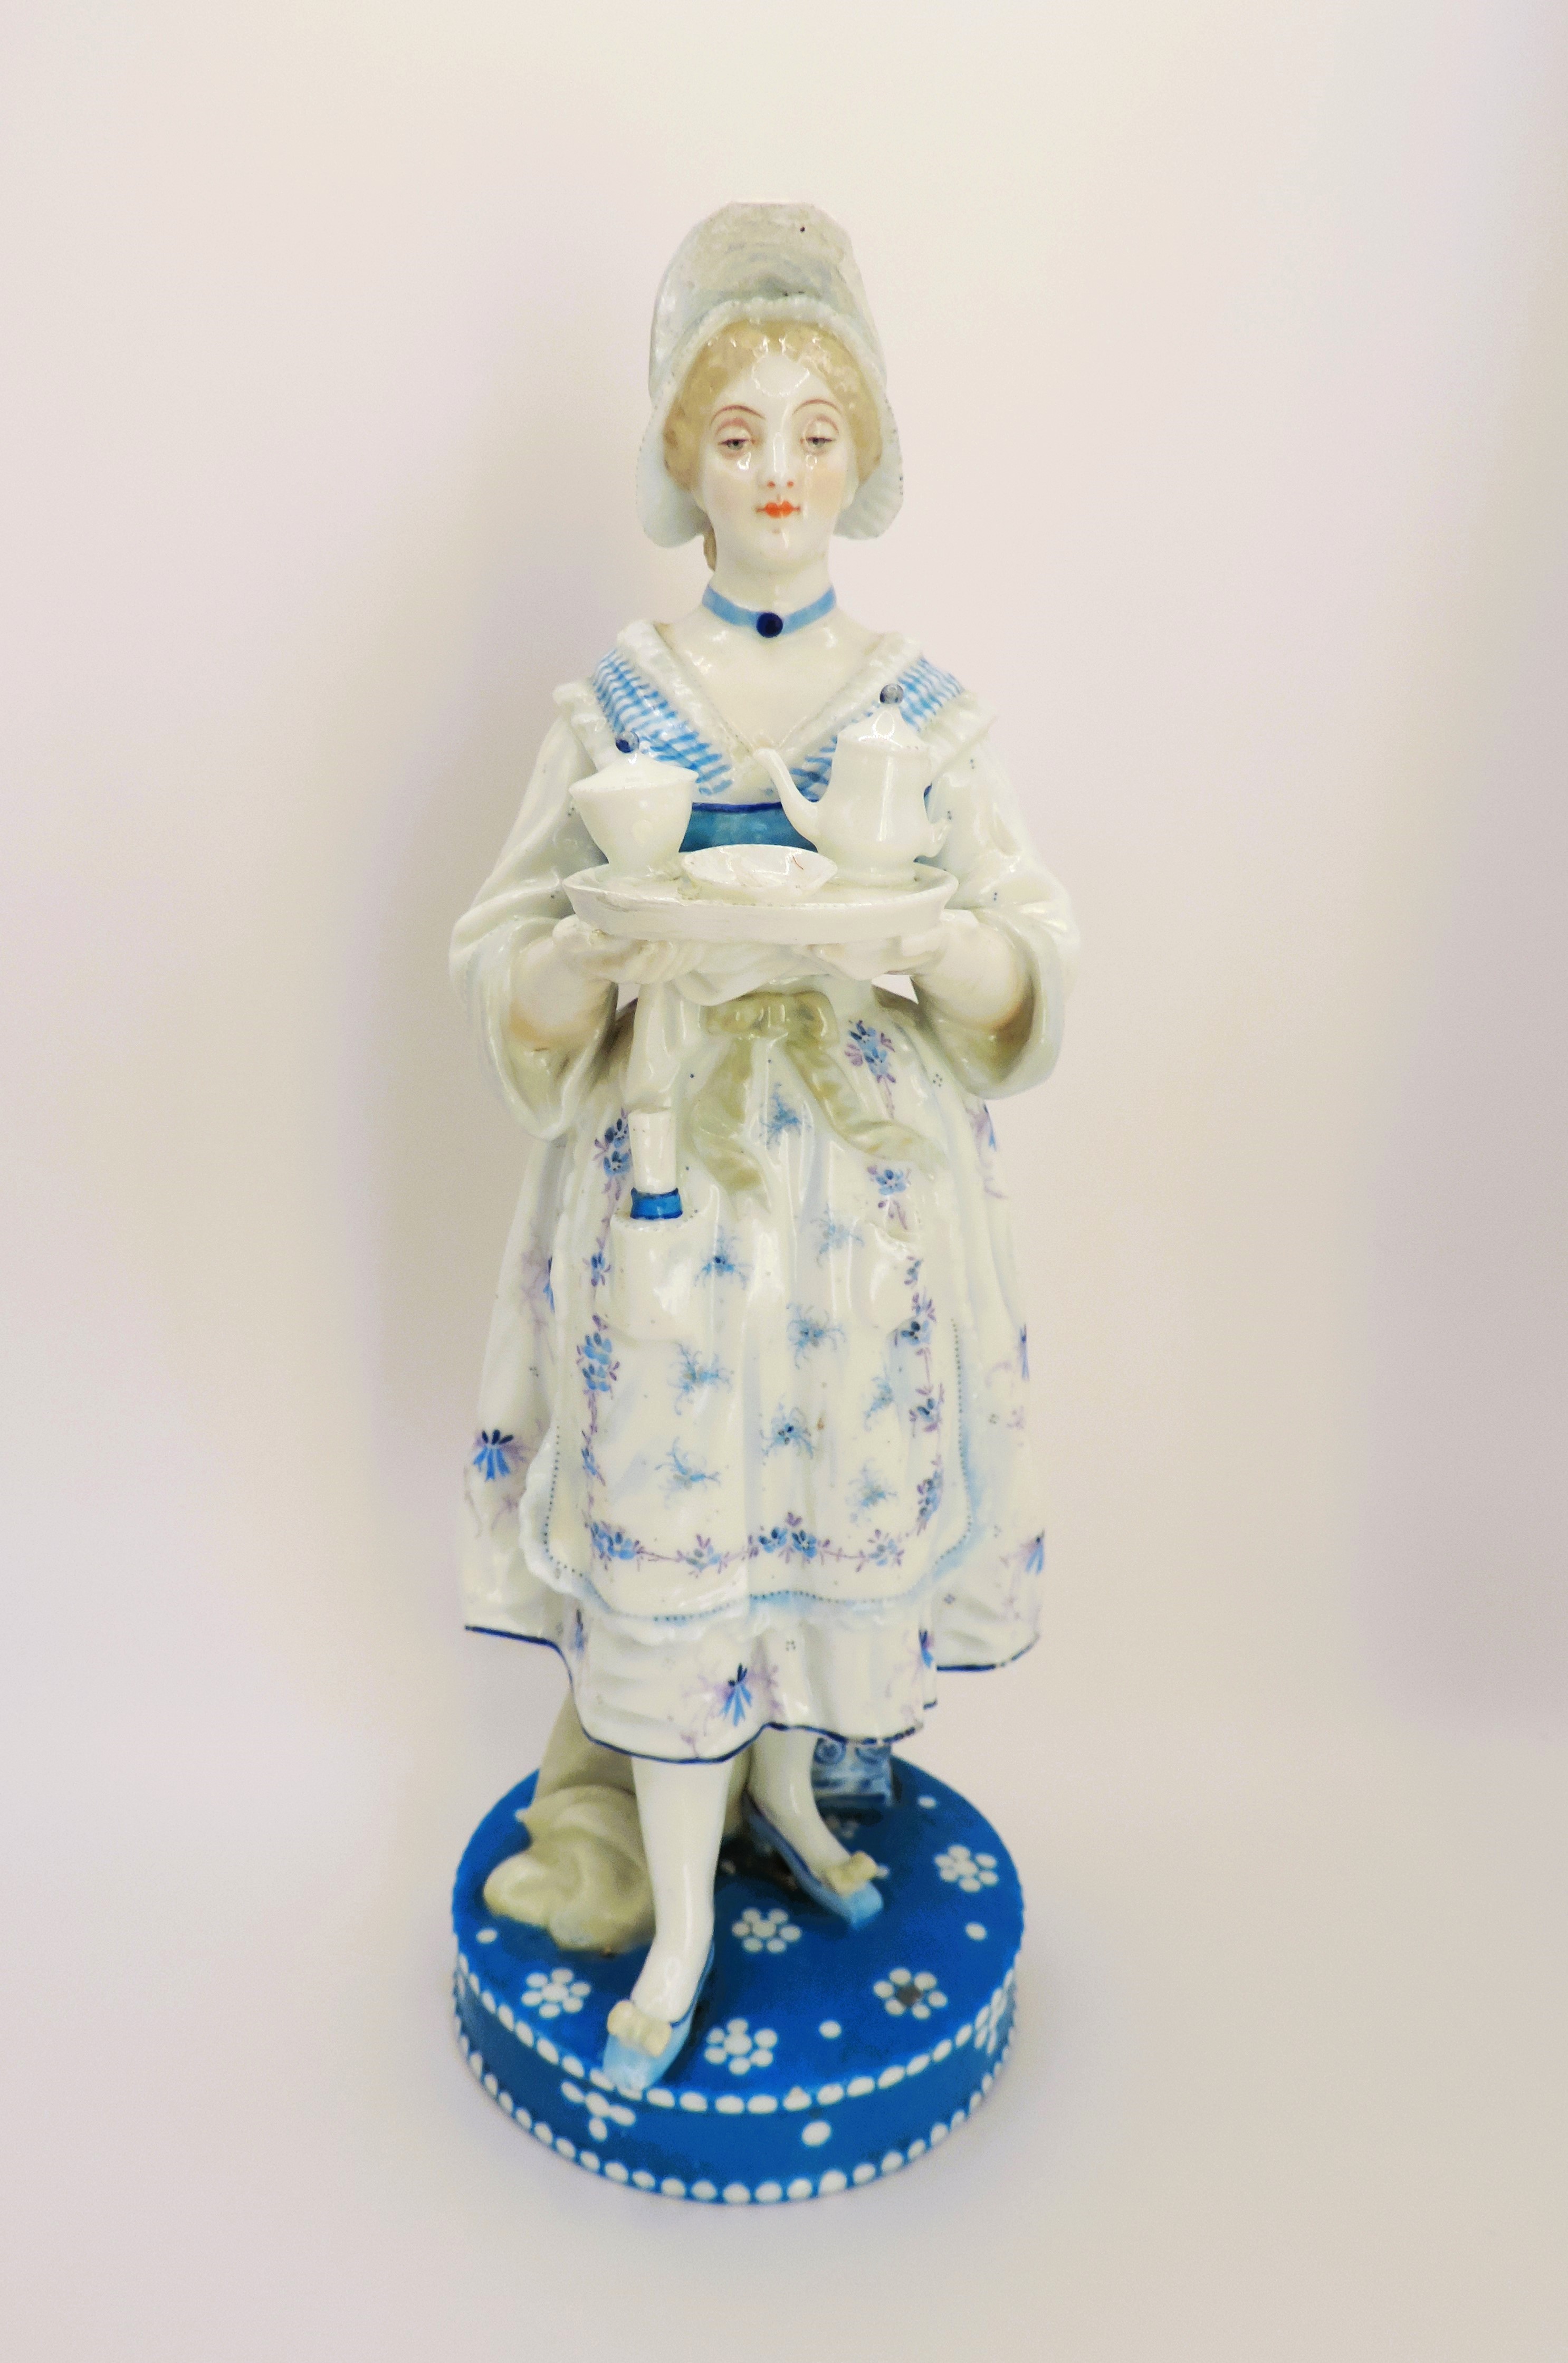 Antique Vion & Baury French Porcelain Figurine Lady with Tea Tray - Image 7 of 7